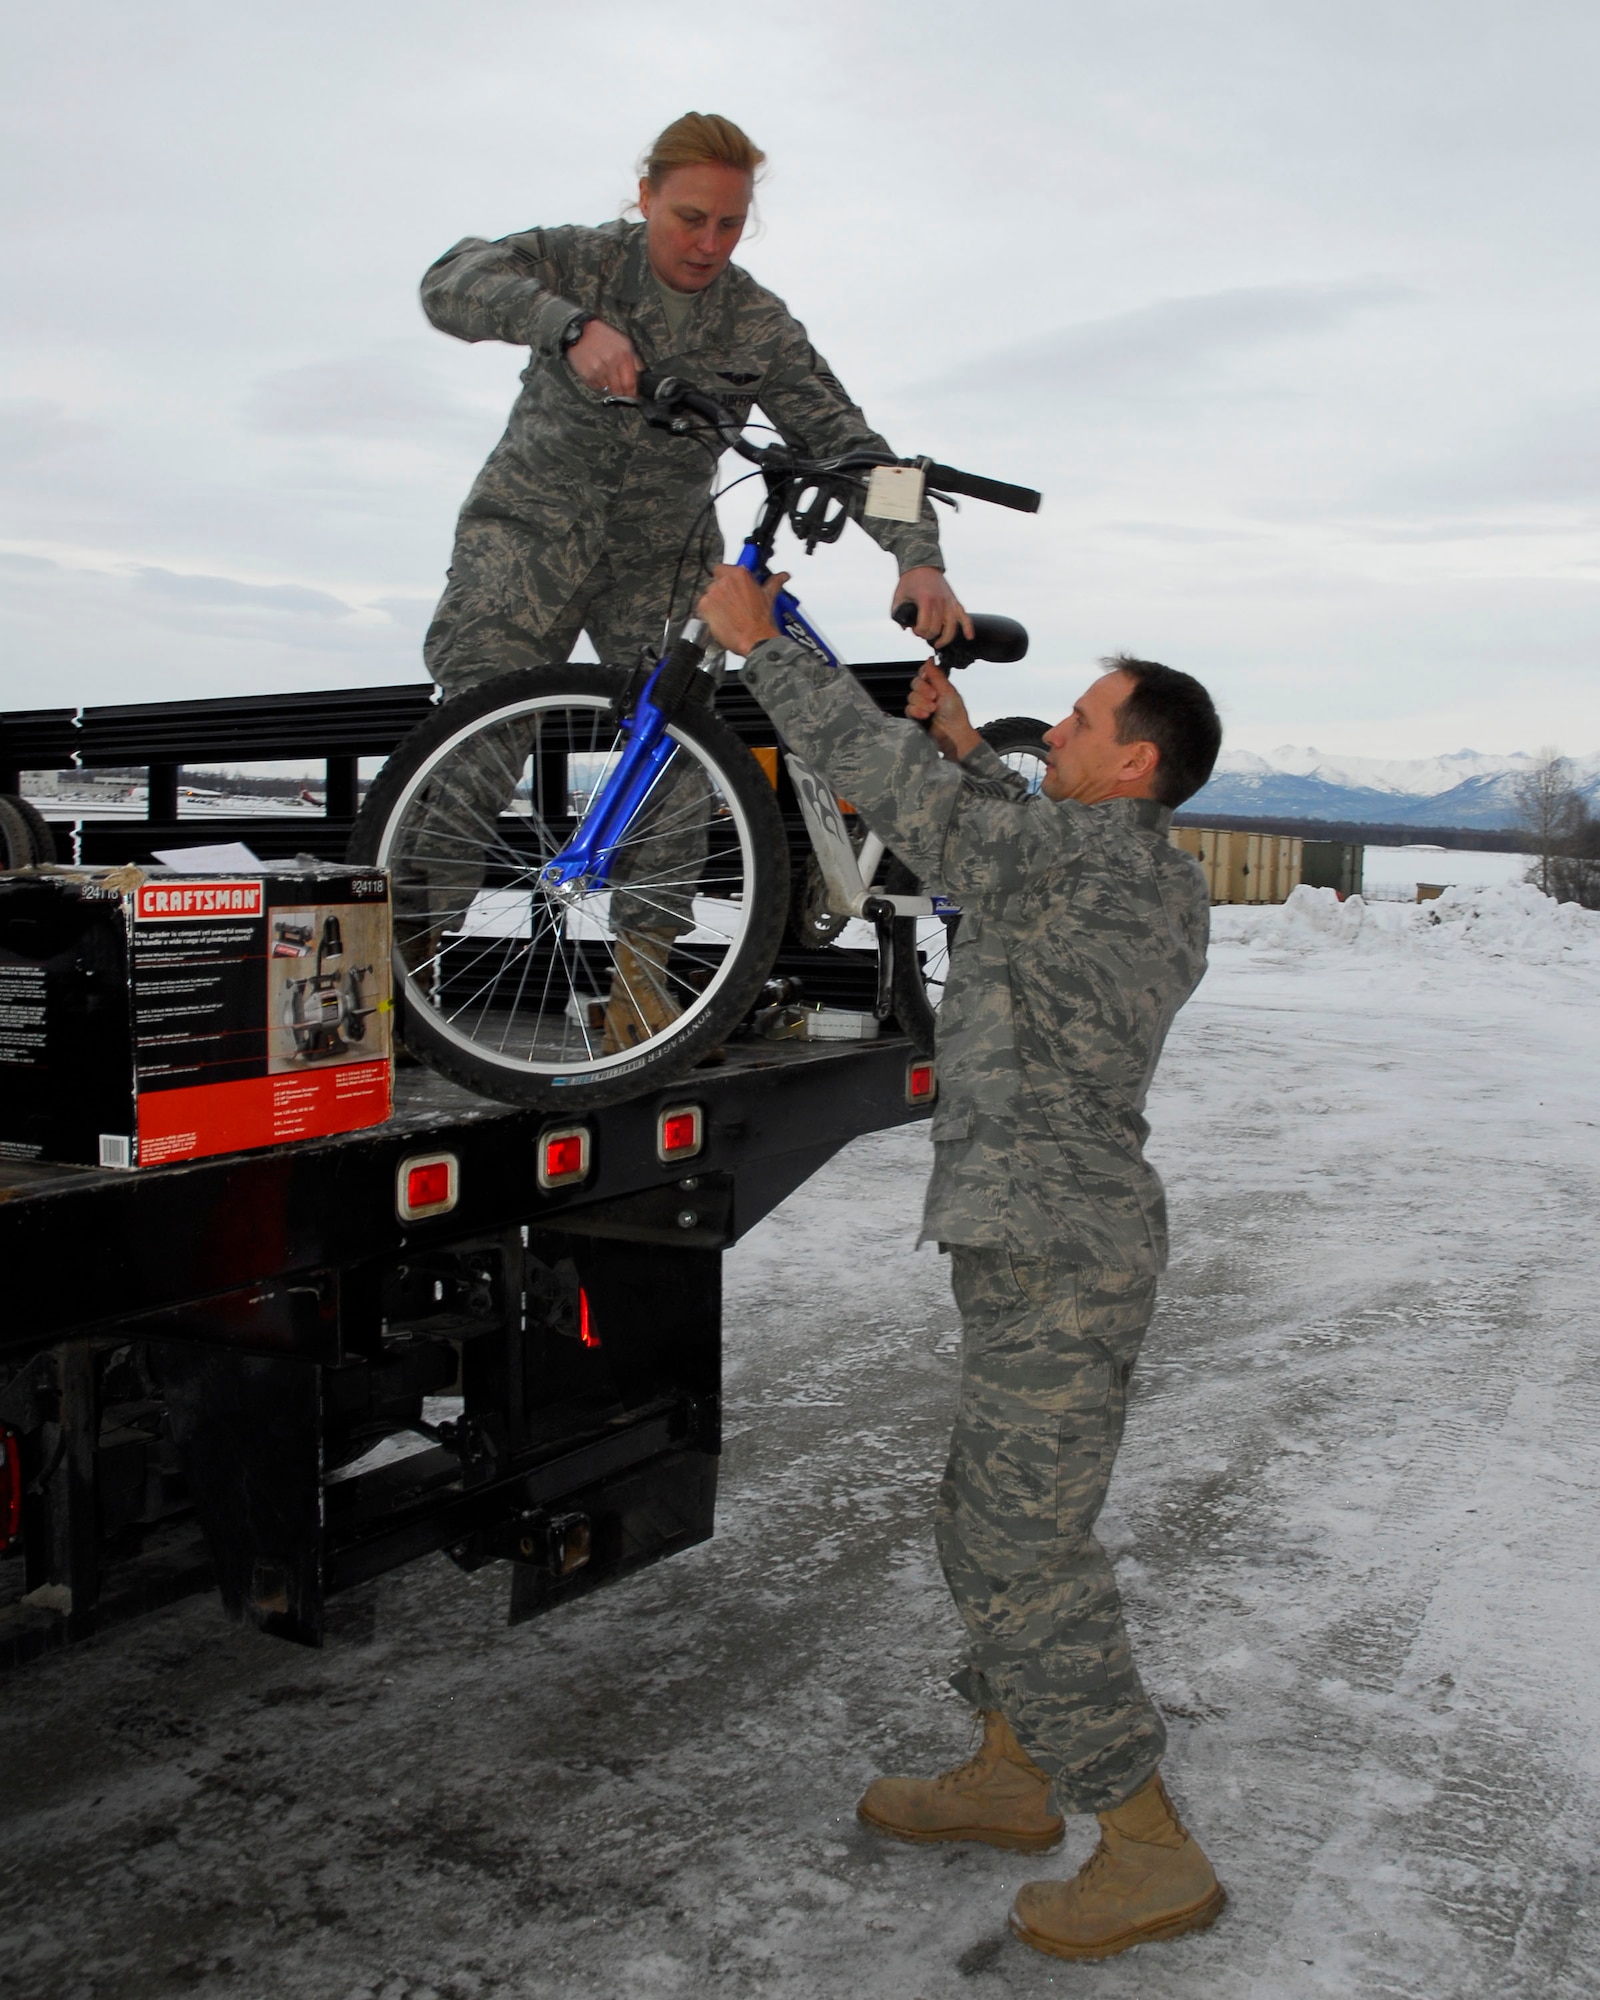 Alaska Air Guardsman Master Sgt. Tess Walsh hands Senior Master Sgt. Thomas Martin a bicycle from the truck bed on December 5, 2009. Walsh and Martin are from the 176th Logistics Readiness Squadron, Alaska Air National Guard, Anchorage, Alaska. The bicycle and twenty-two other refurbished bikes will be airlifted by the Alaska Air National Guard?s144th Airlift Squadron, to Afghanistan to be given to disadvantaged children. (Alaska Air National Guard photo by Tech. Sgt. Shannon Oleson)